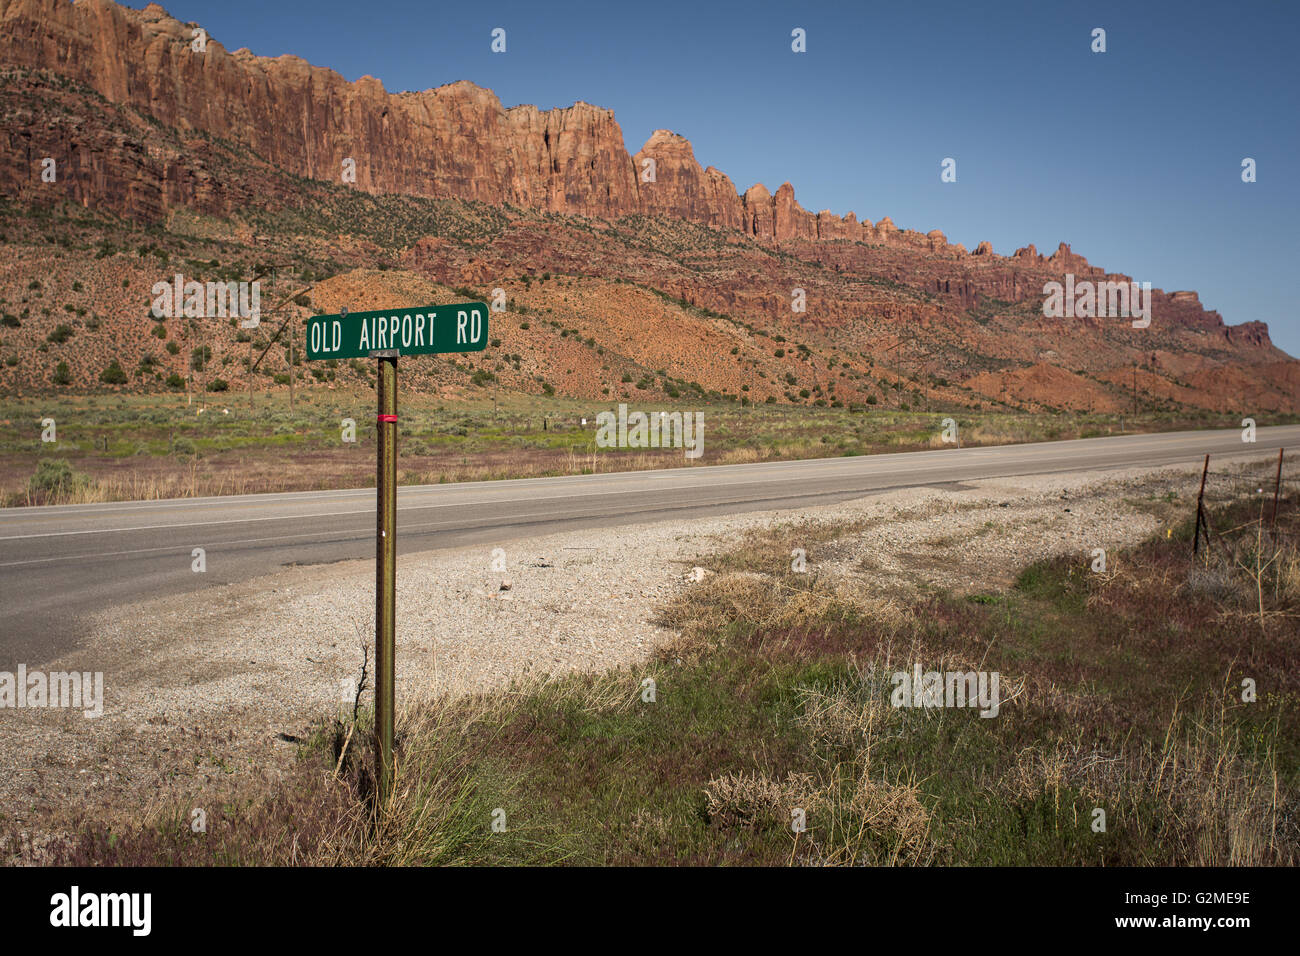 Old Airport Road sign and geological formations in Moab, Utah, USA Stock Photo